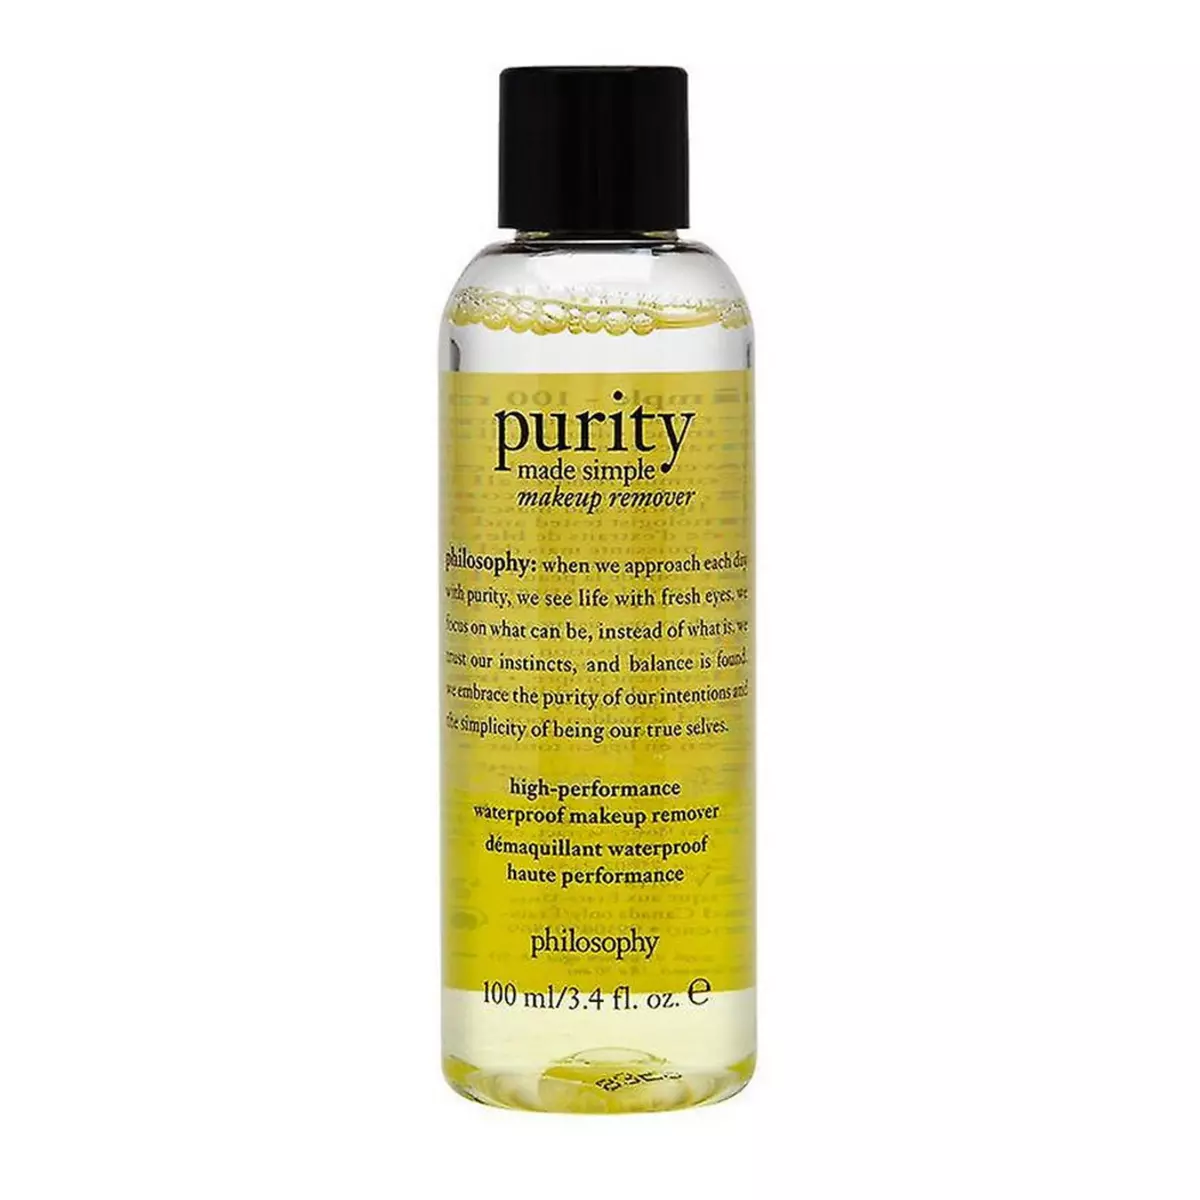  Eau nettoyante Micellar Cleanser Philosophy Purity made Simple 100ml